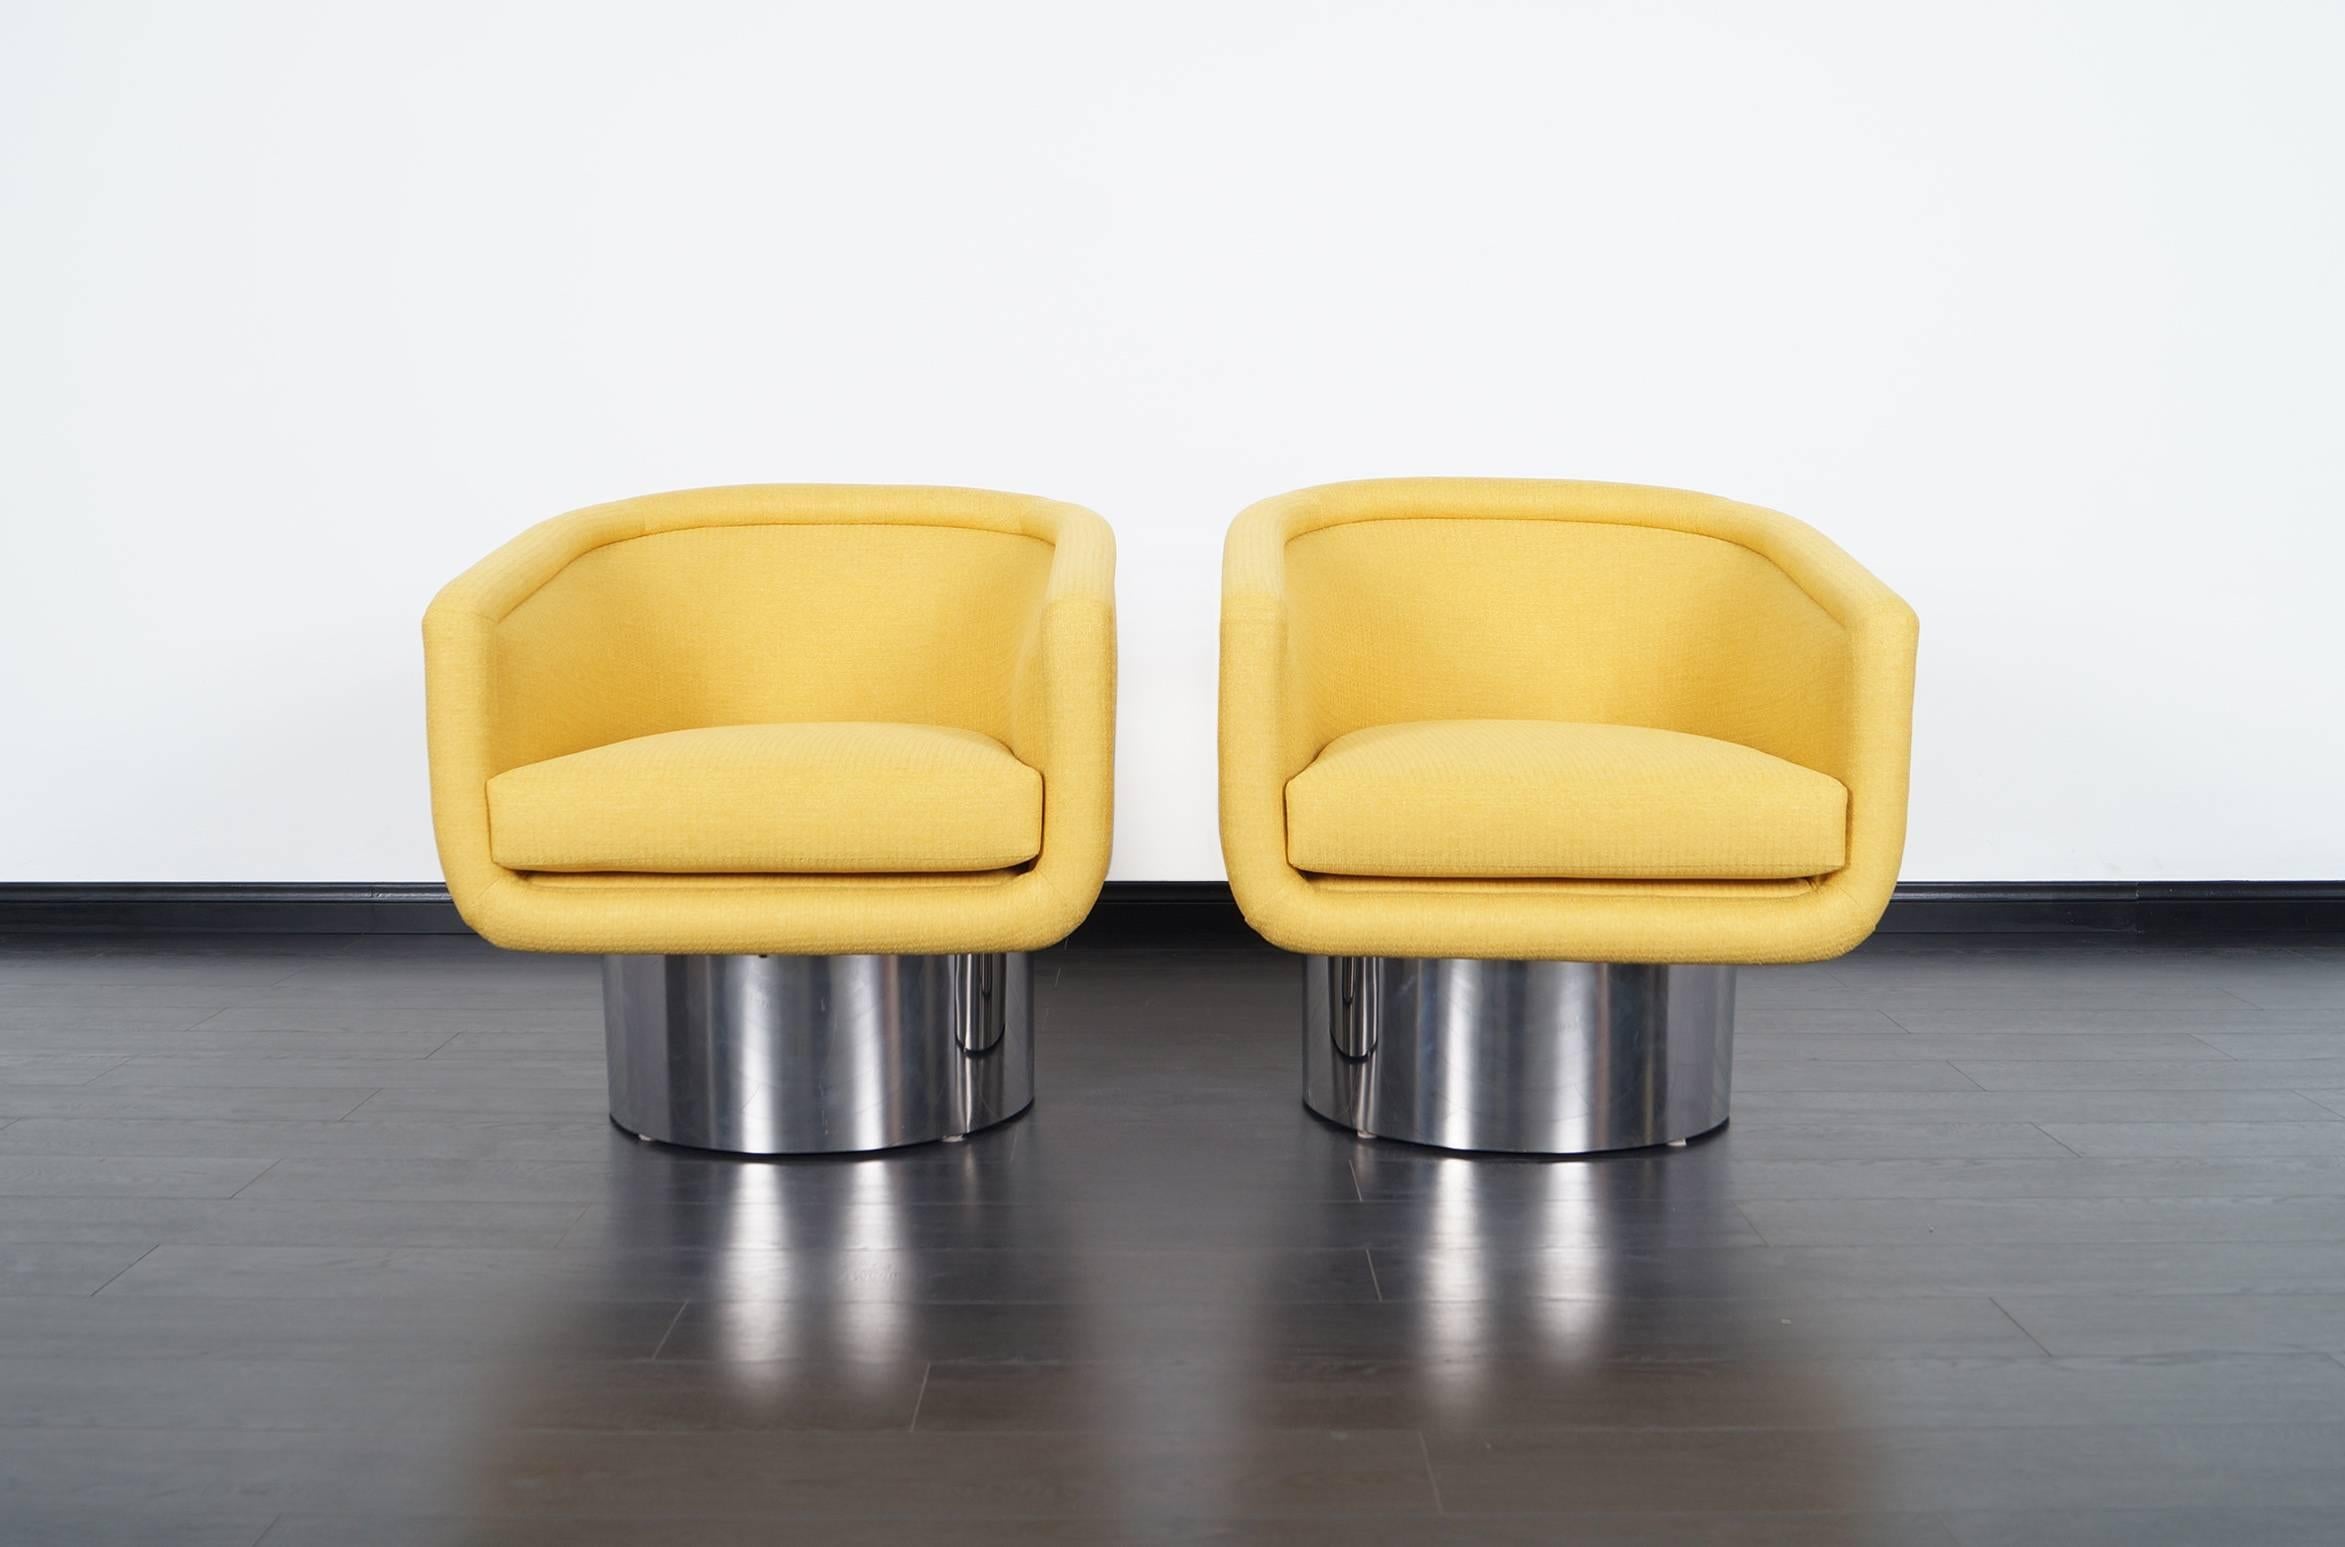 Pair of stunning chrome swivel lounge chairs designed by Leon Rosen for Pace collection.